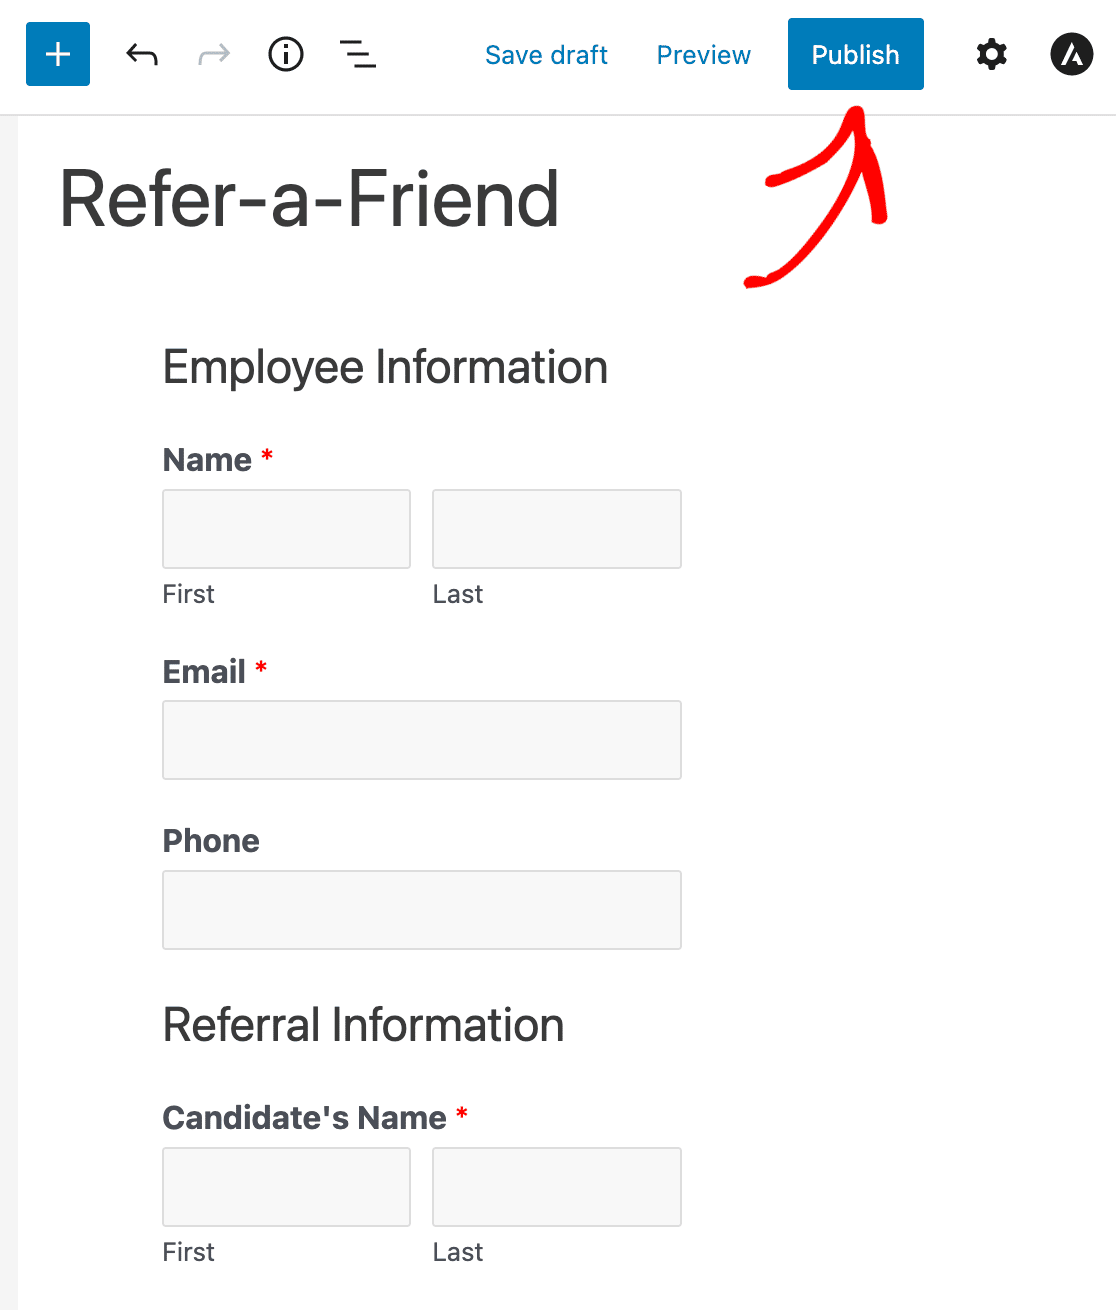 Publishing your employee referral form